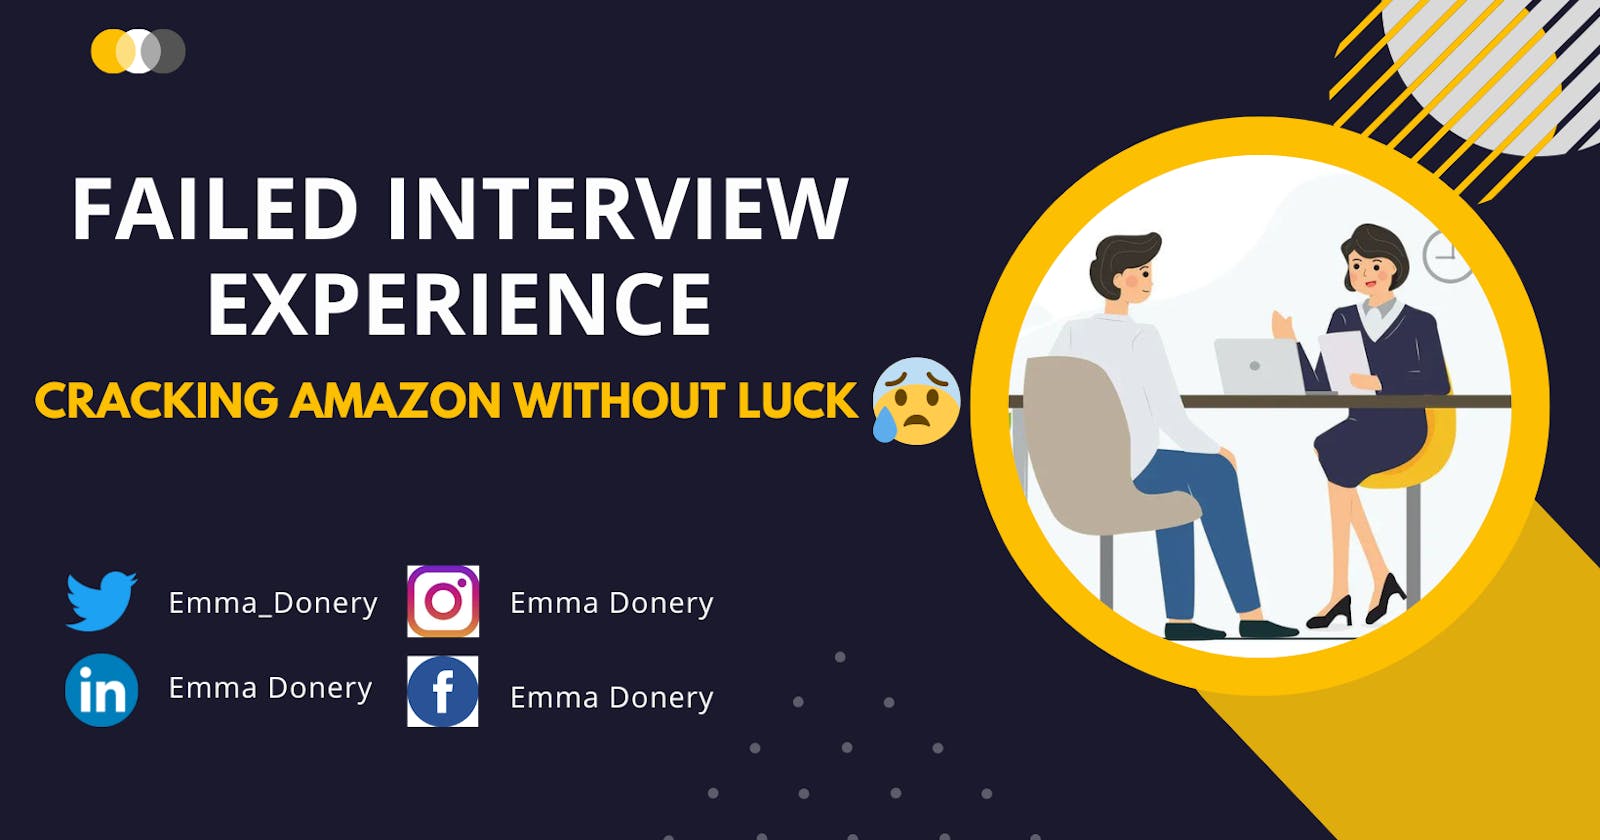 FAILED INTERVIEW EXPERIENCE - Cracking Amazon without Luck